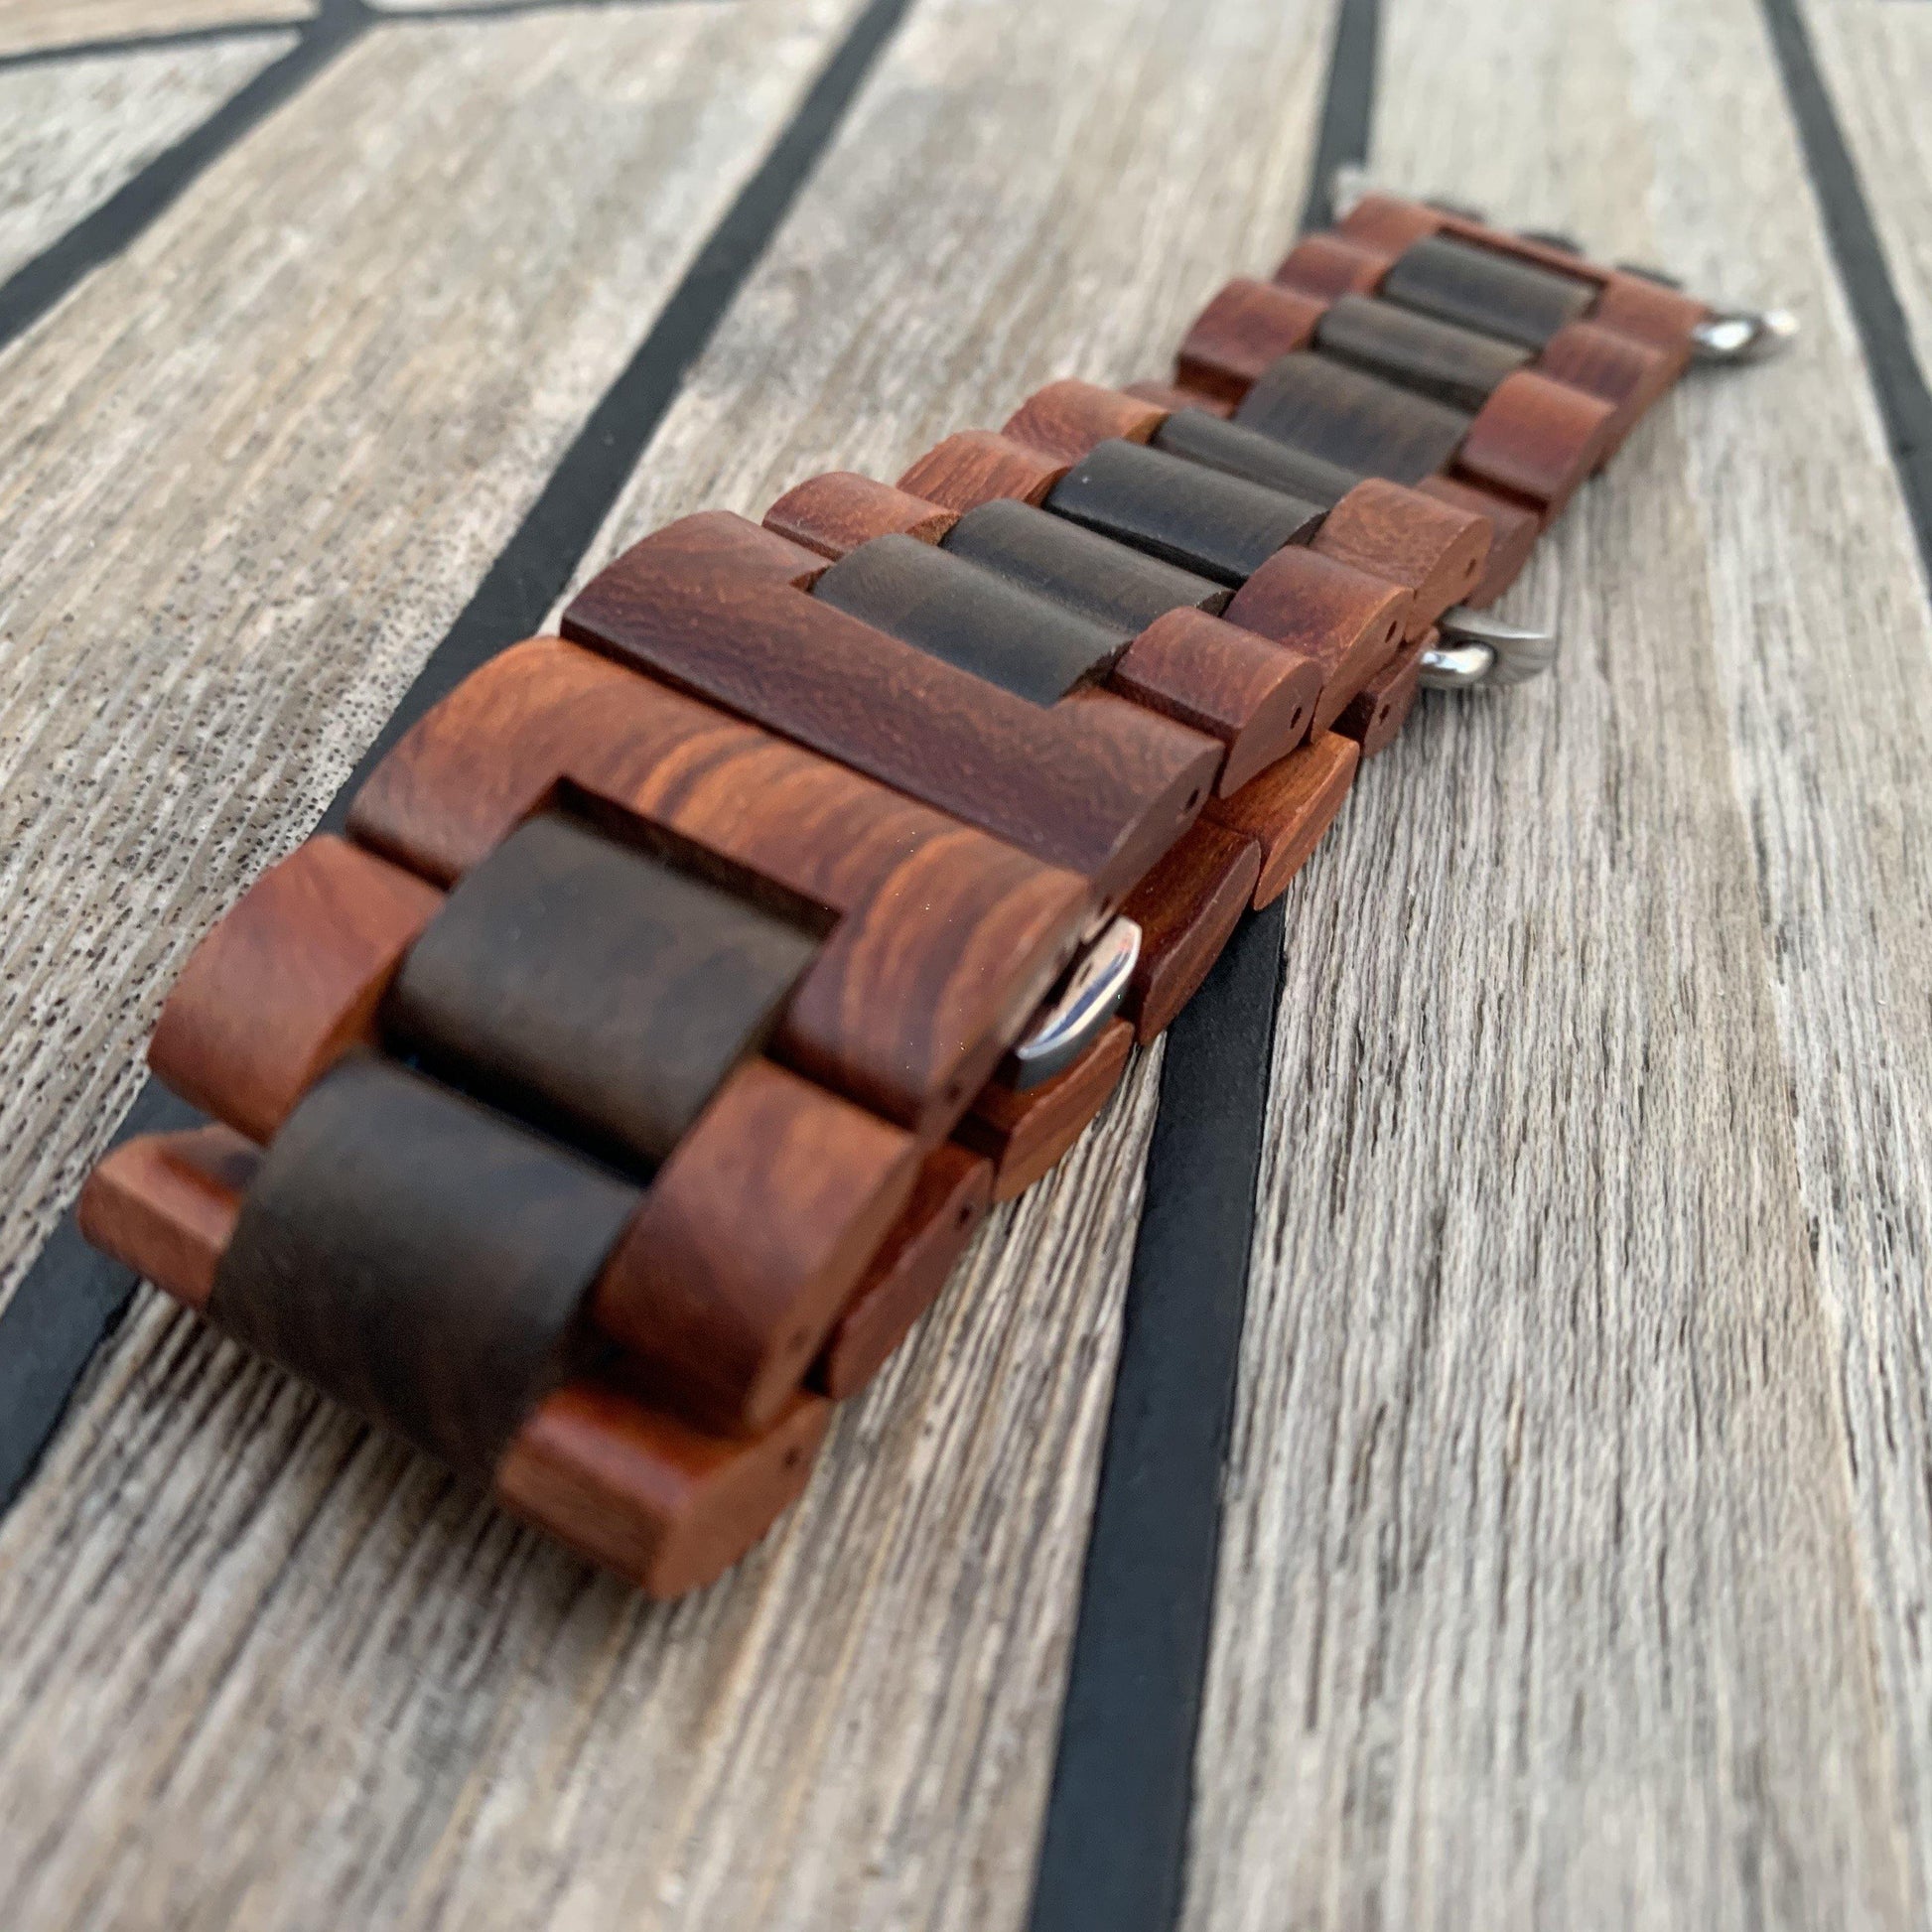 Rose Ebony Wooden Band for Apple Watch 🌳 Natural Wood. ♻️ Eco-friendly. ✈️ Free Worldwide Shipping. 🎁 Perfect Gift.